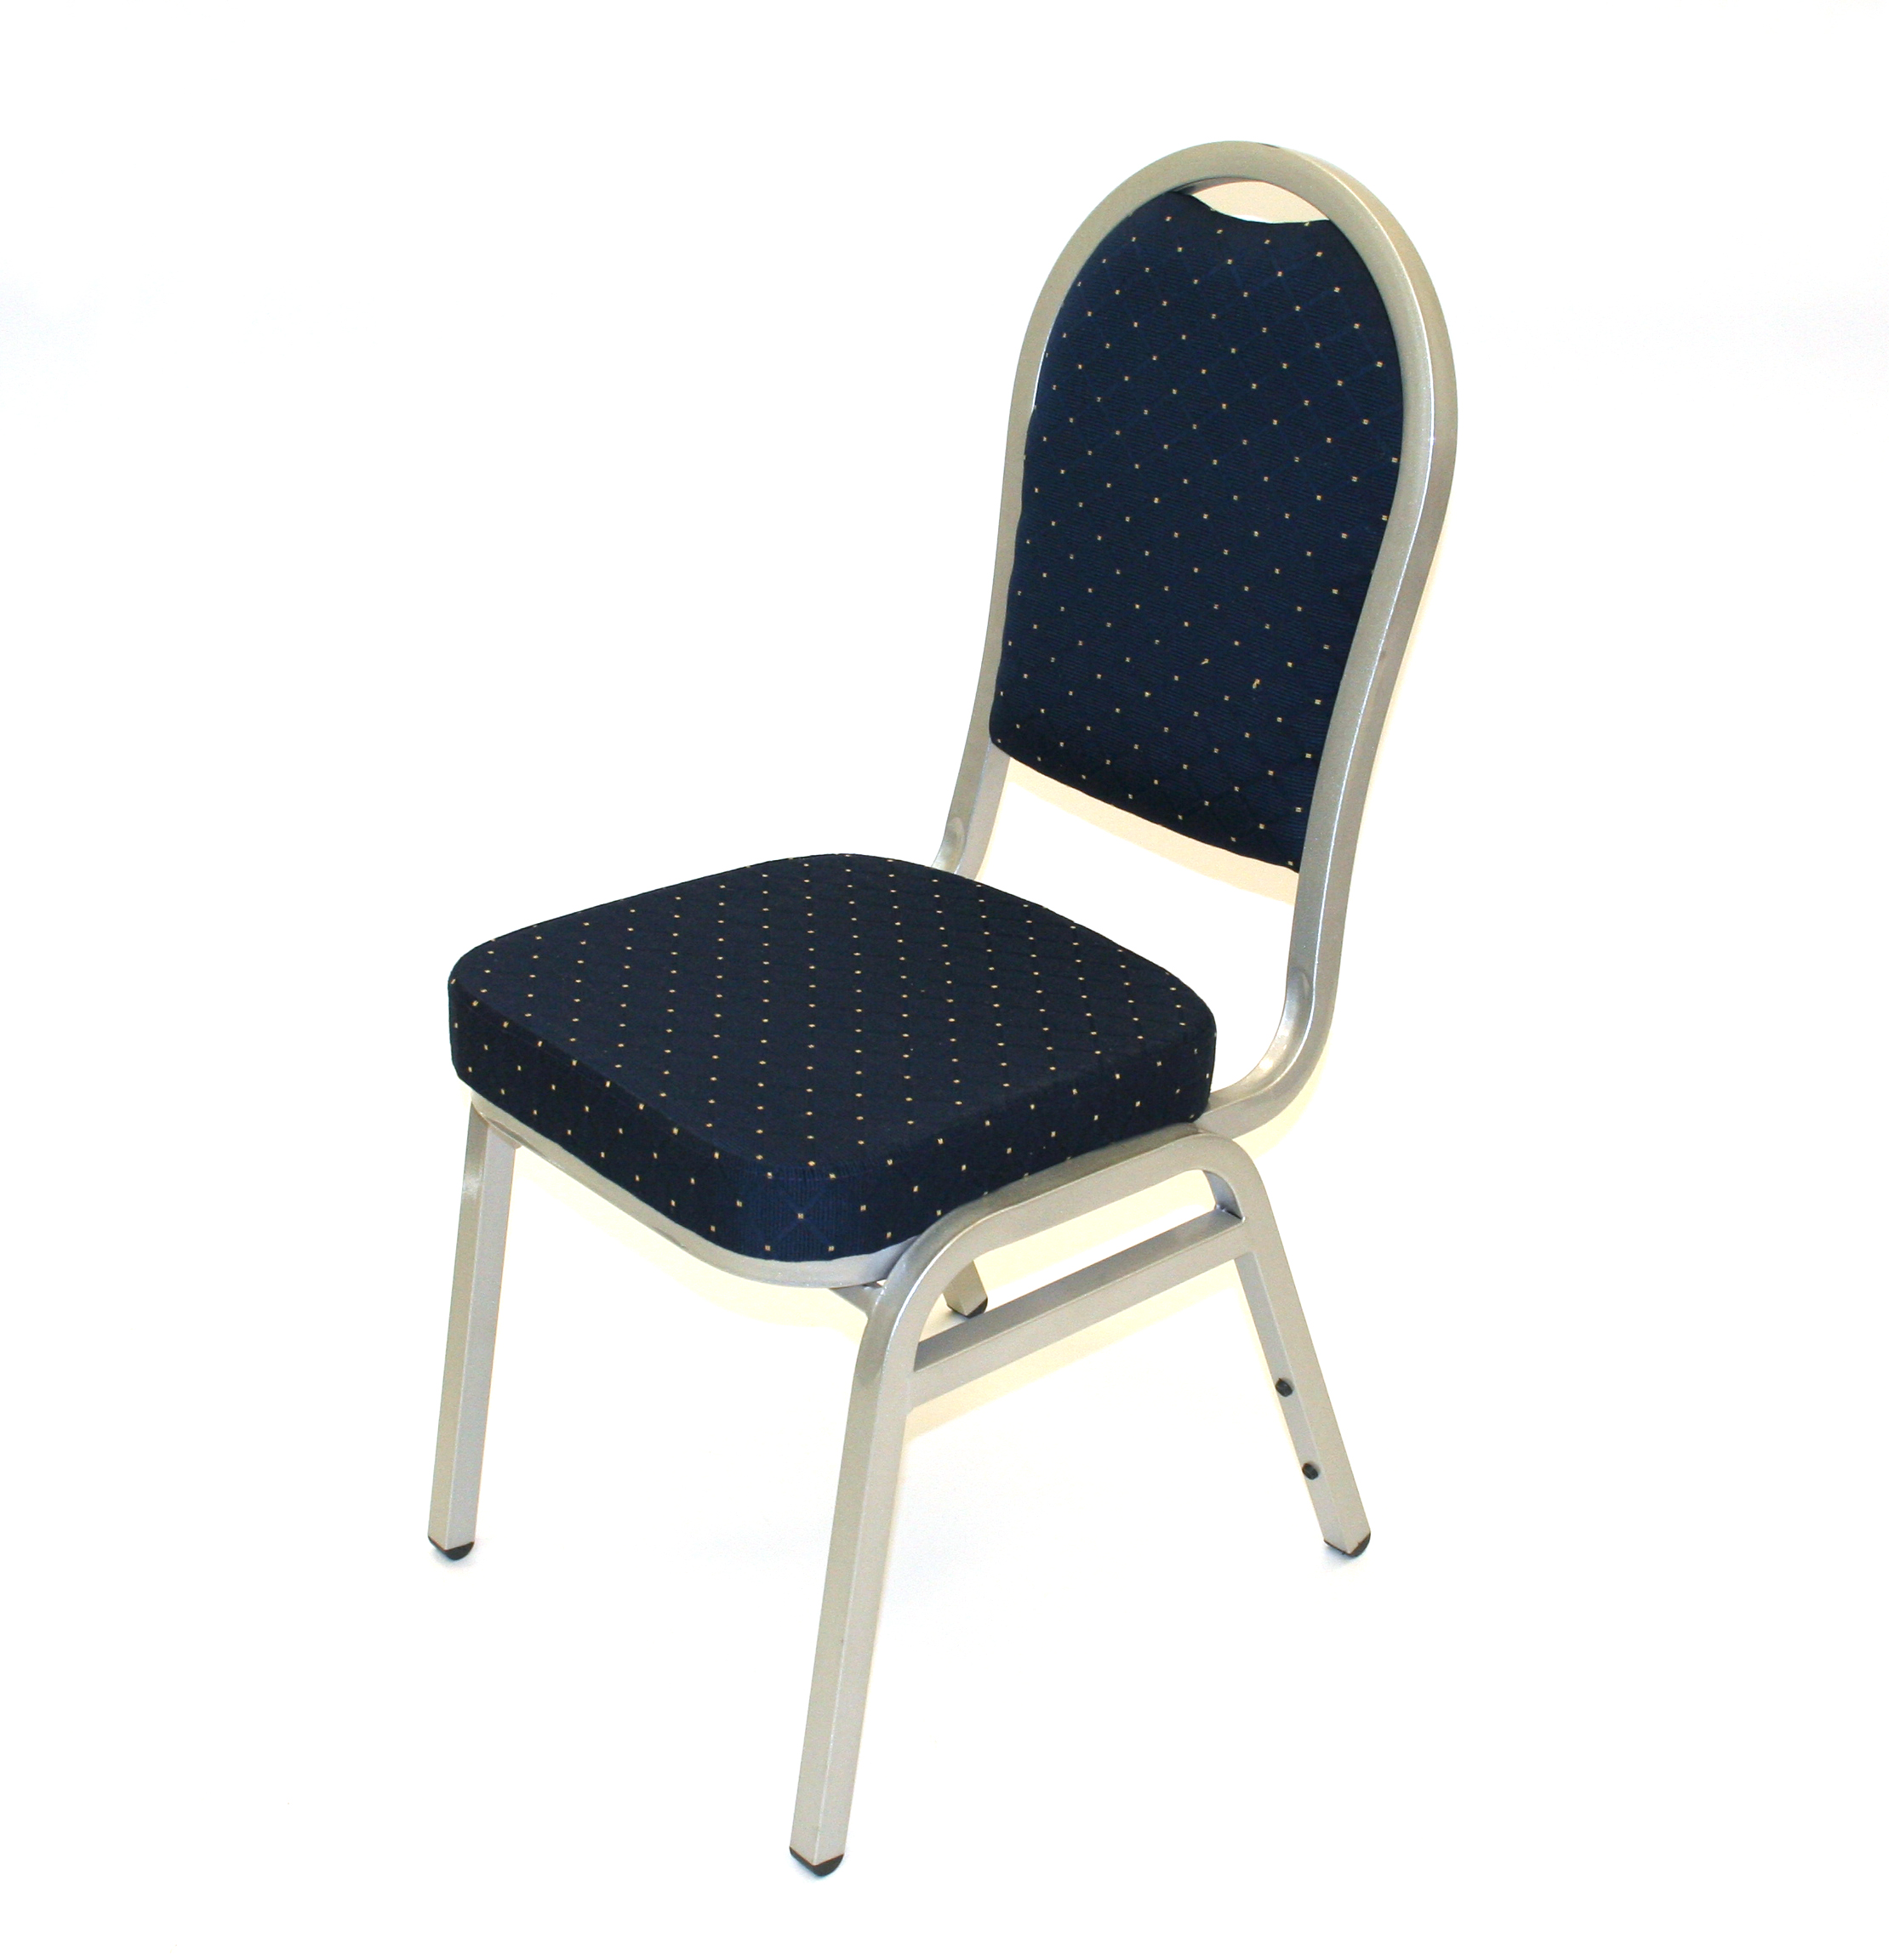 Blue & Silver Banquet Chair Hire - Weddings, Banqueting Chairs - BE